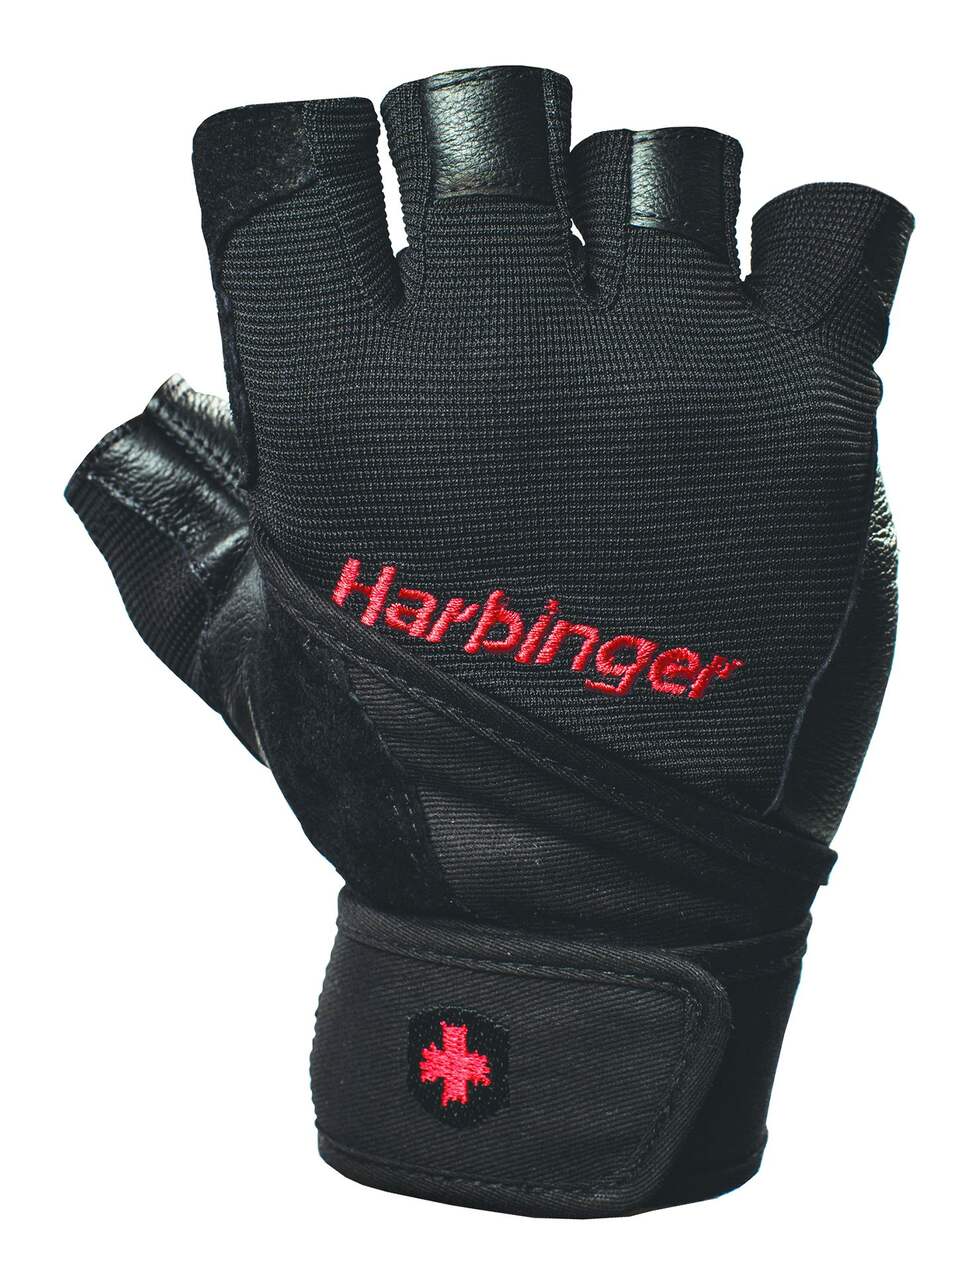 https://media-www.canadiantire.ca/product/playing/exercise/exercise-accessories/0848960/harbinger-men-s-pro-wristwrap-glove-large-732ea152-382a-4b03-b0af-b433cdbd1fc0-jpgrendition.jpg?imdensity=1&imwidth=1244&impolicy=mZoom